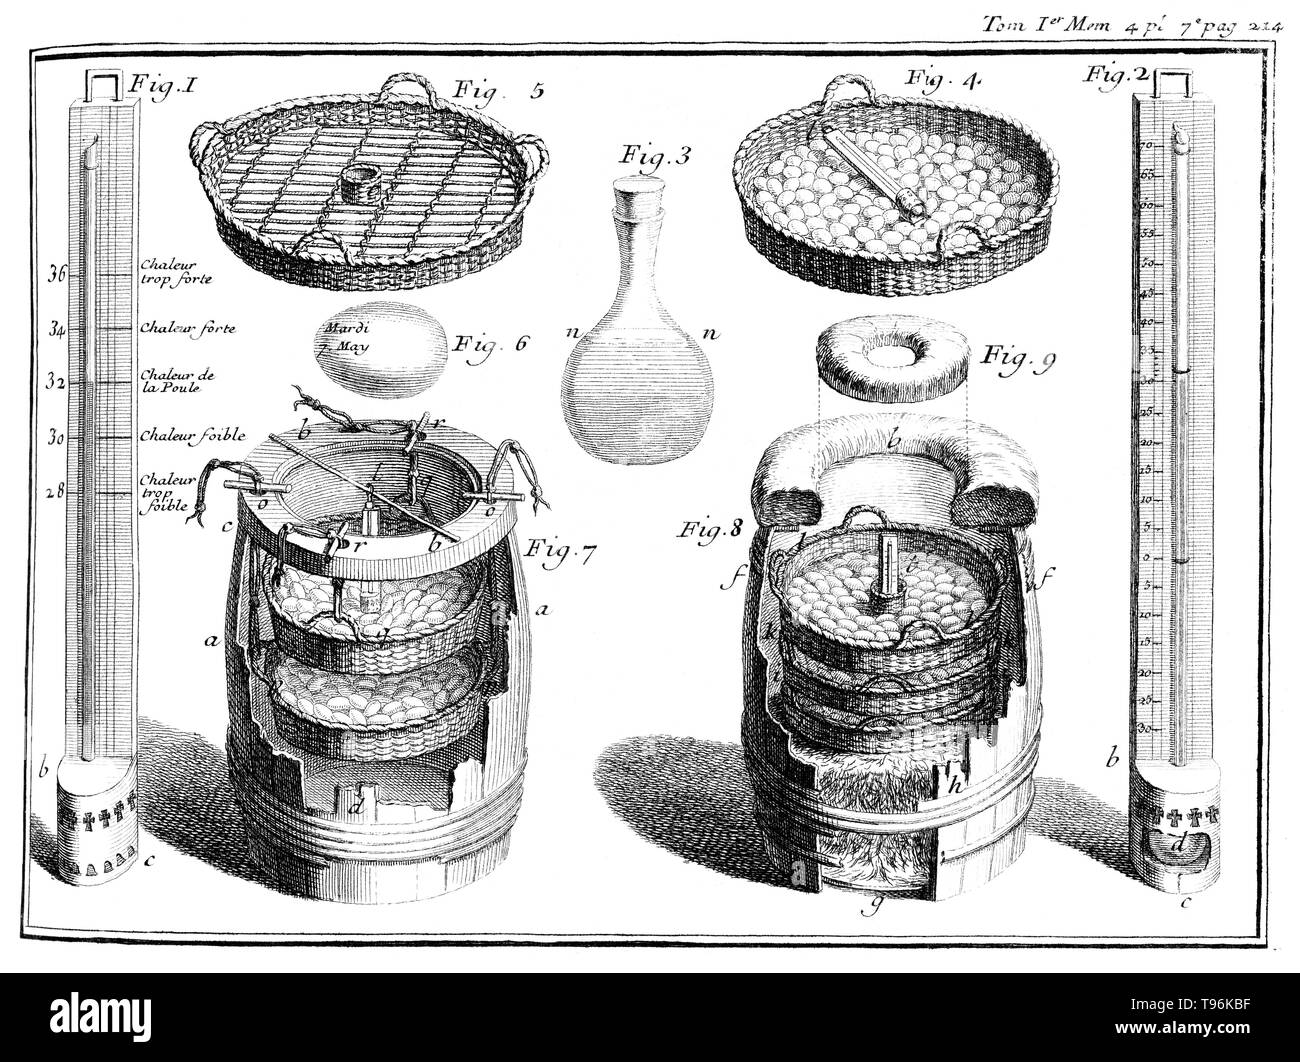 Method for incubation of poultry eggs. Plate 7, page 214. René Antoine Ferchault de Réaumur (February 28, 1683 - October 17, 1757) was a French scientist who contributed to many different fields, especially the study of insects. In 1699 he studied civil law and mathematics. In 1703 he went to Paris, where he continued the study of mathematics and physics, and in 1708 was elected, at the age of 24, a member of the Académie des Sciences. Stock Photo